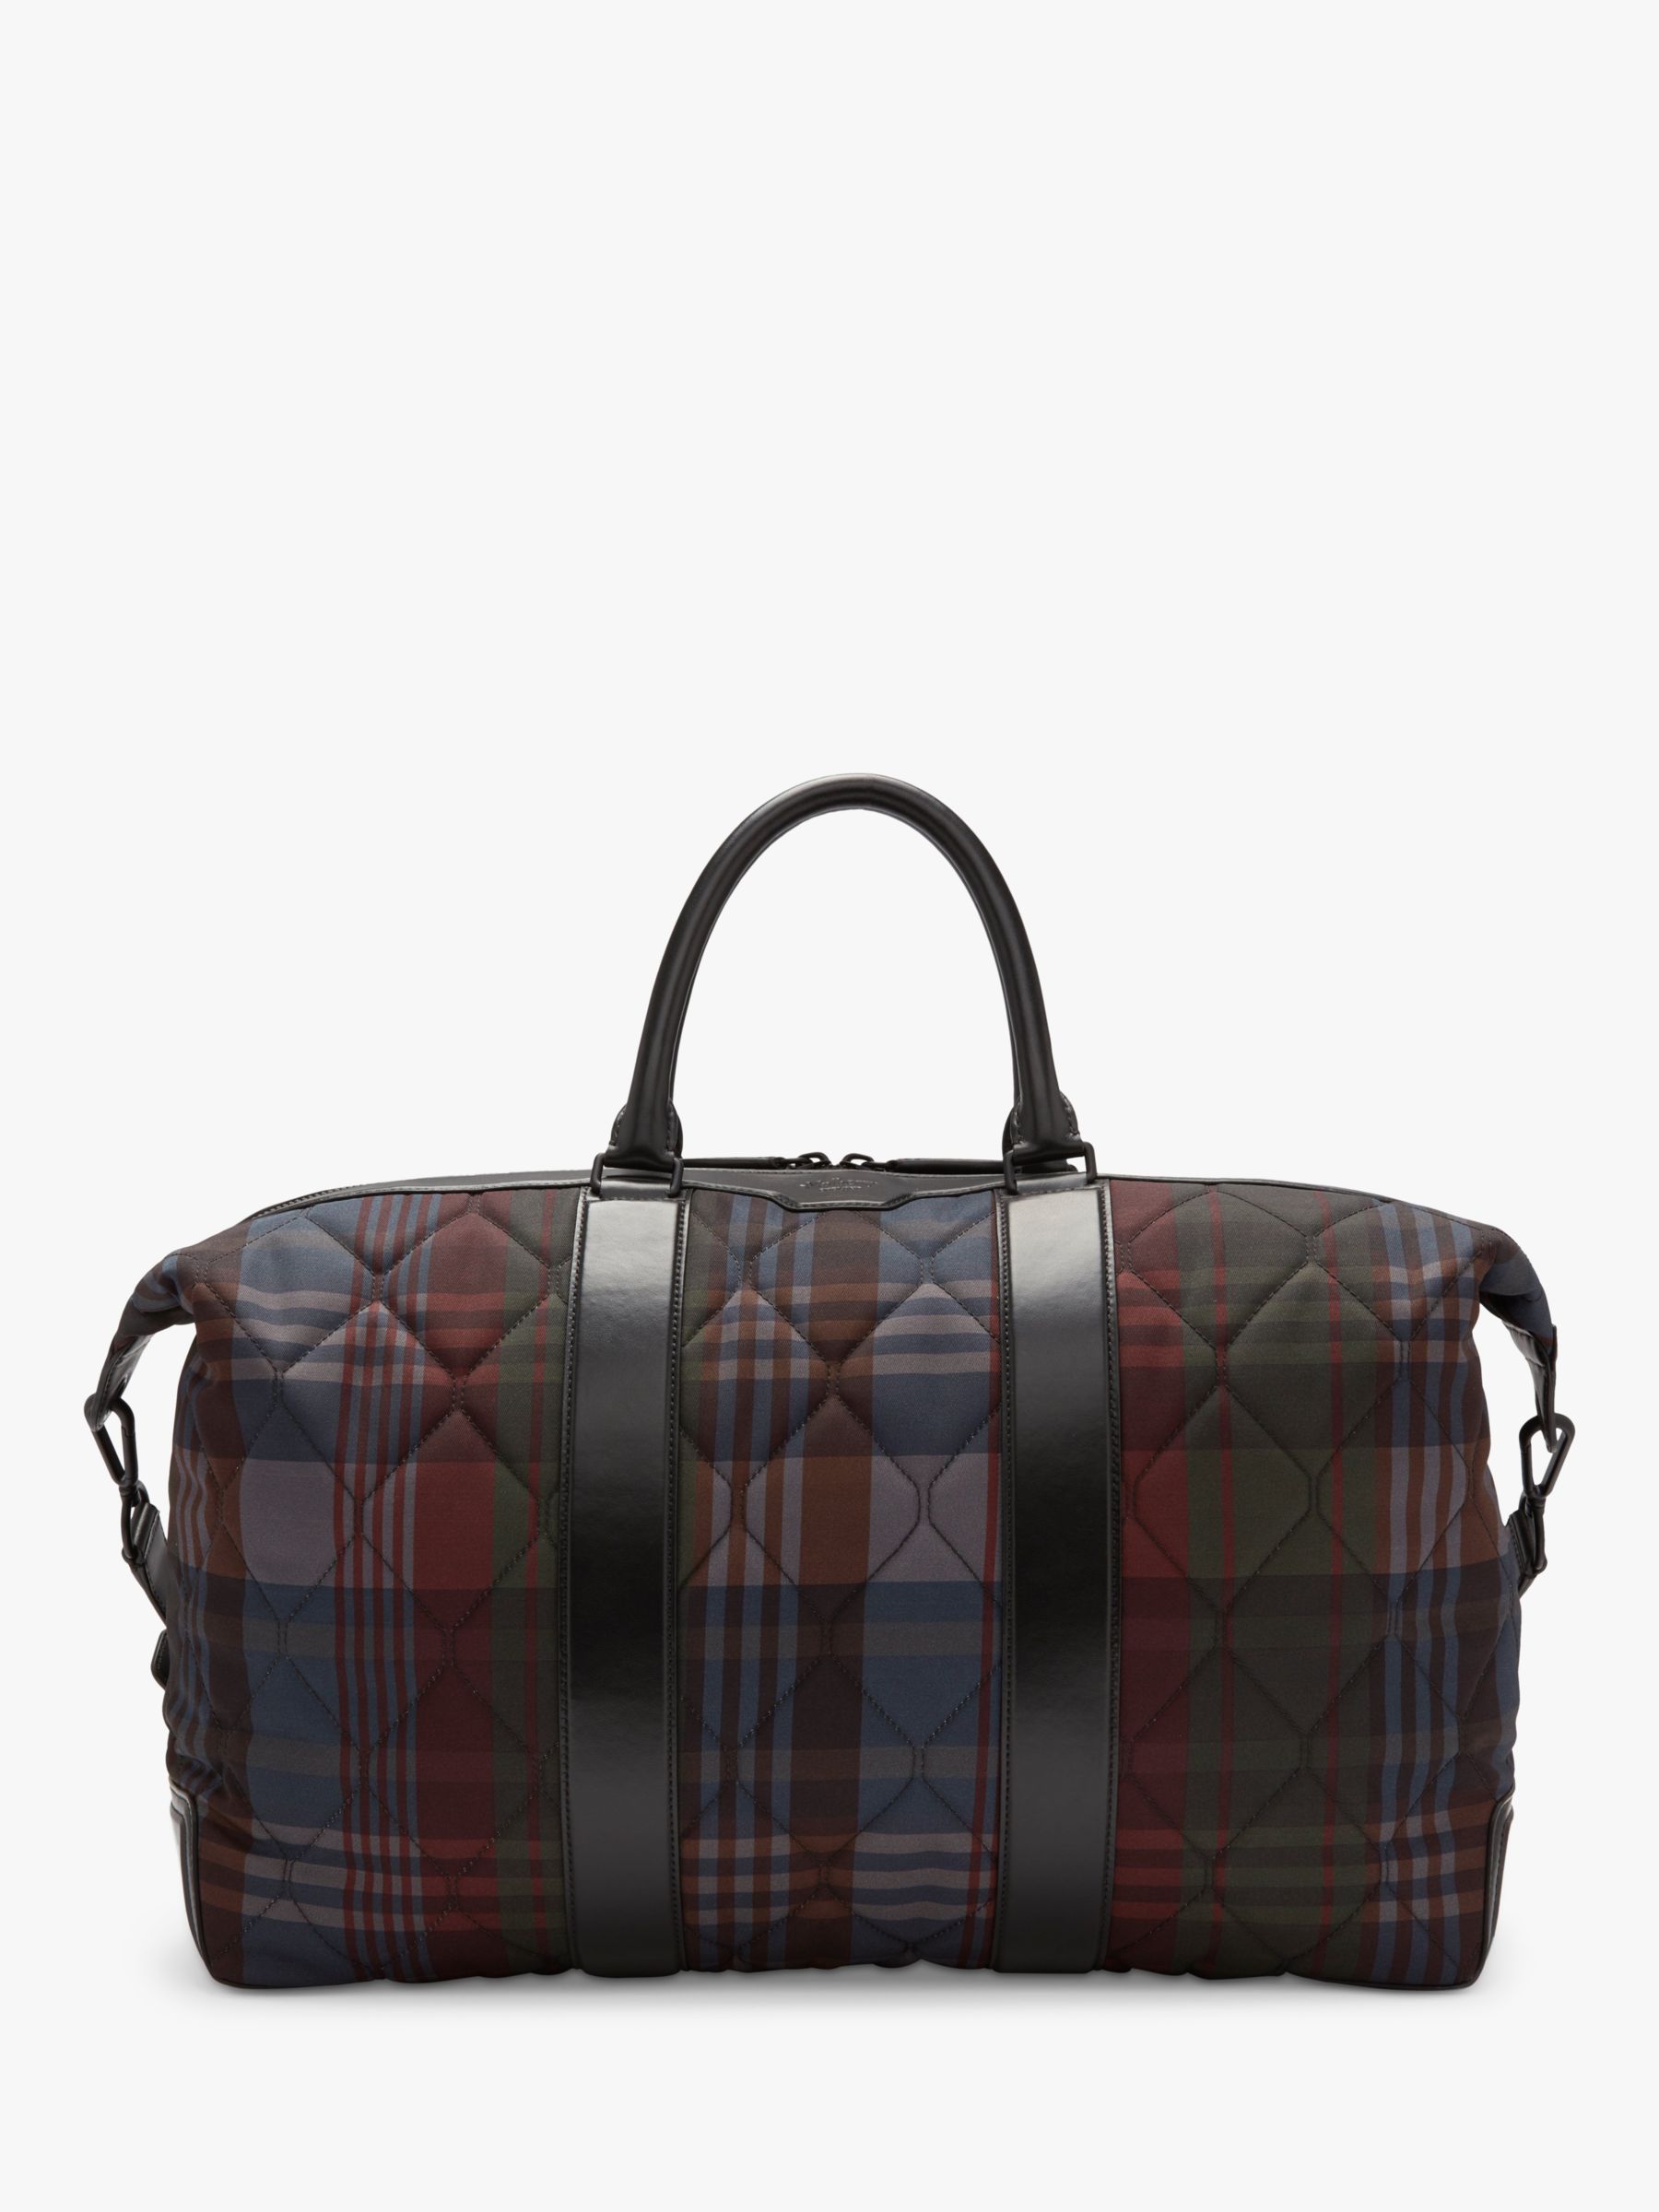 Mulberry Check Quilt Zipped Weekender Bag